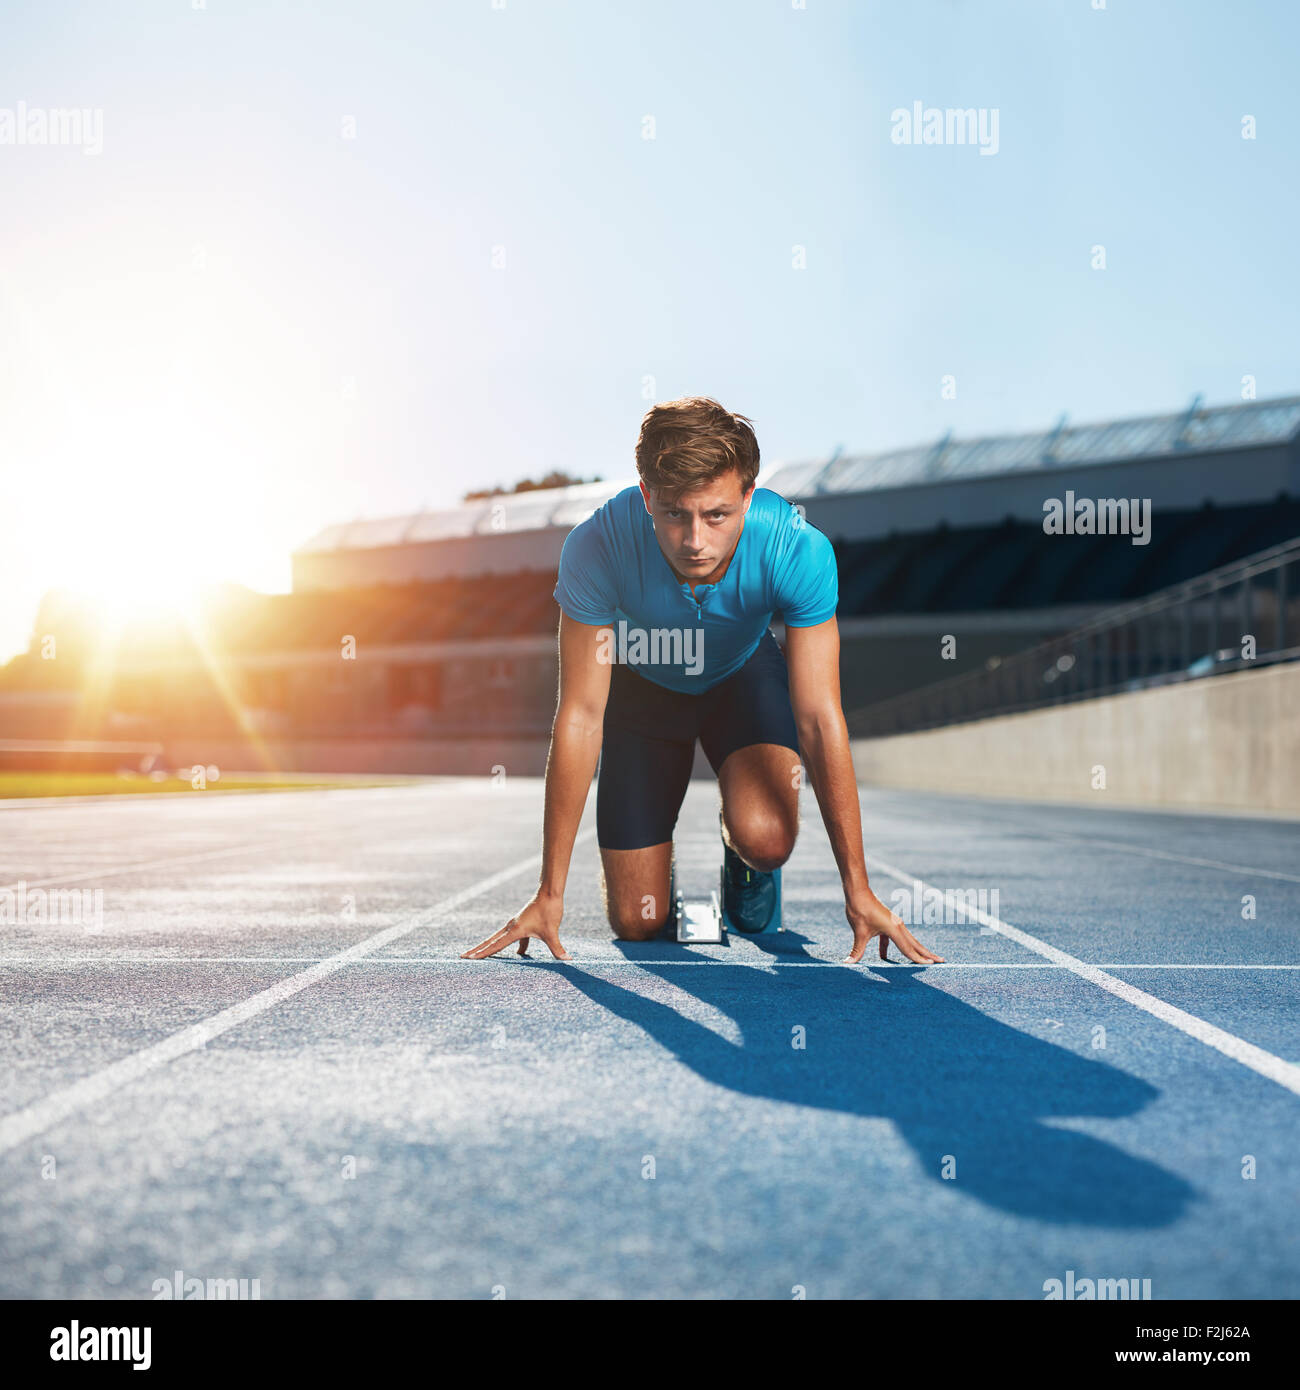 Fit and confident man in starting position ready for running. Male athlete about to start a sprint looking at camera with bright Stock Photo